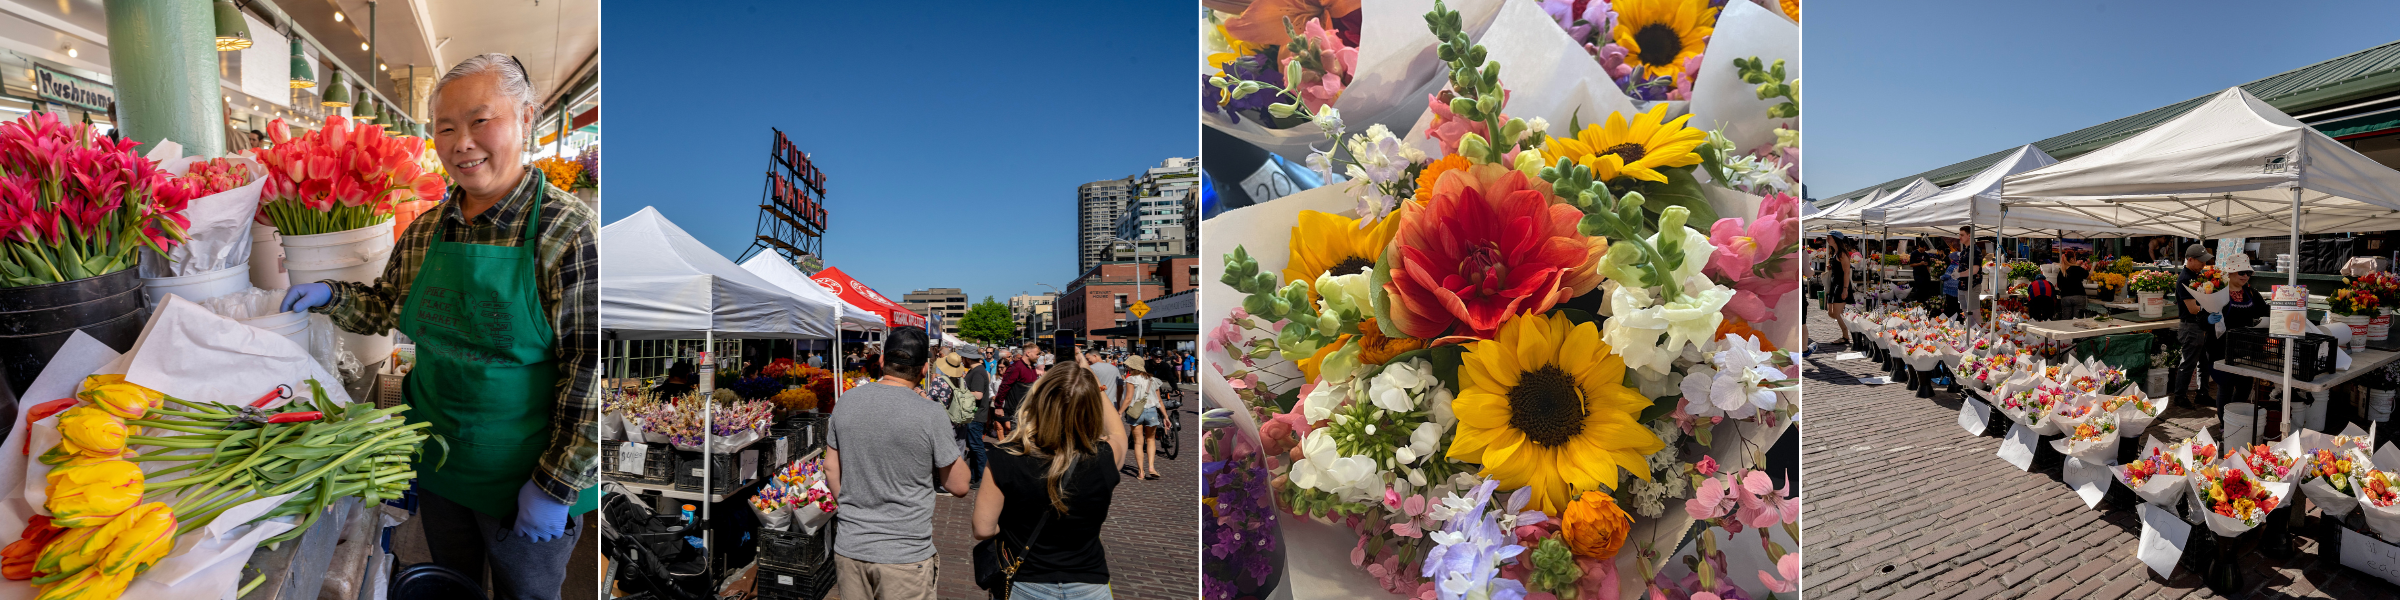 16th Annual Flower Festival - Pike Place Market